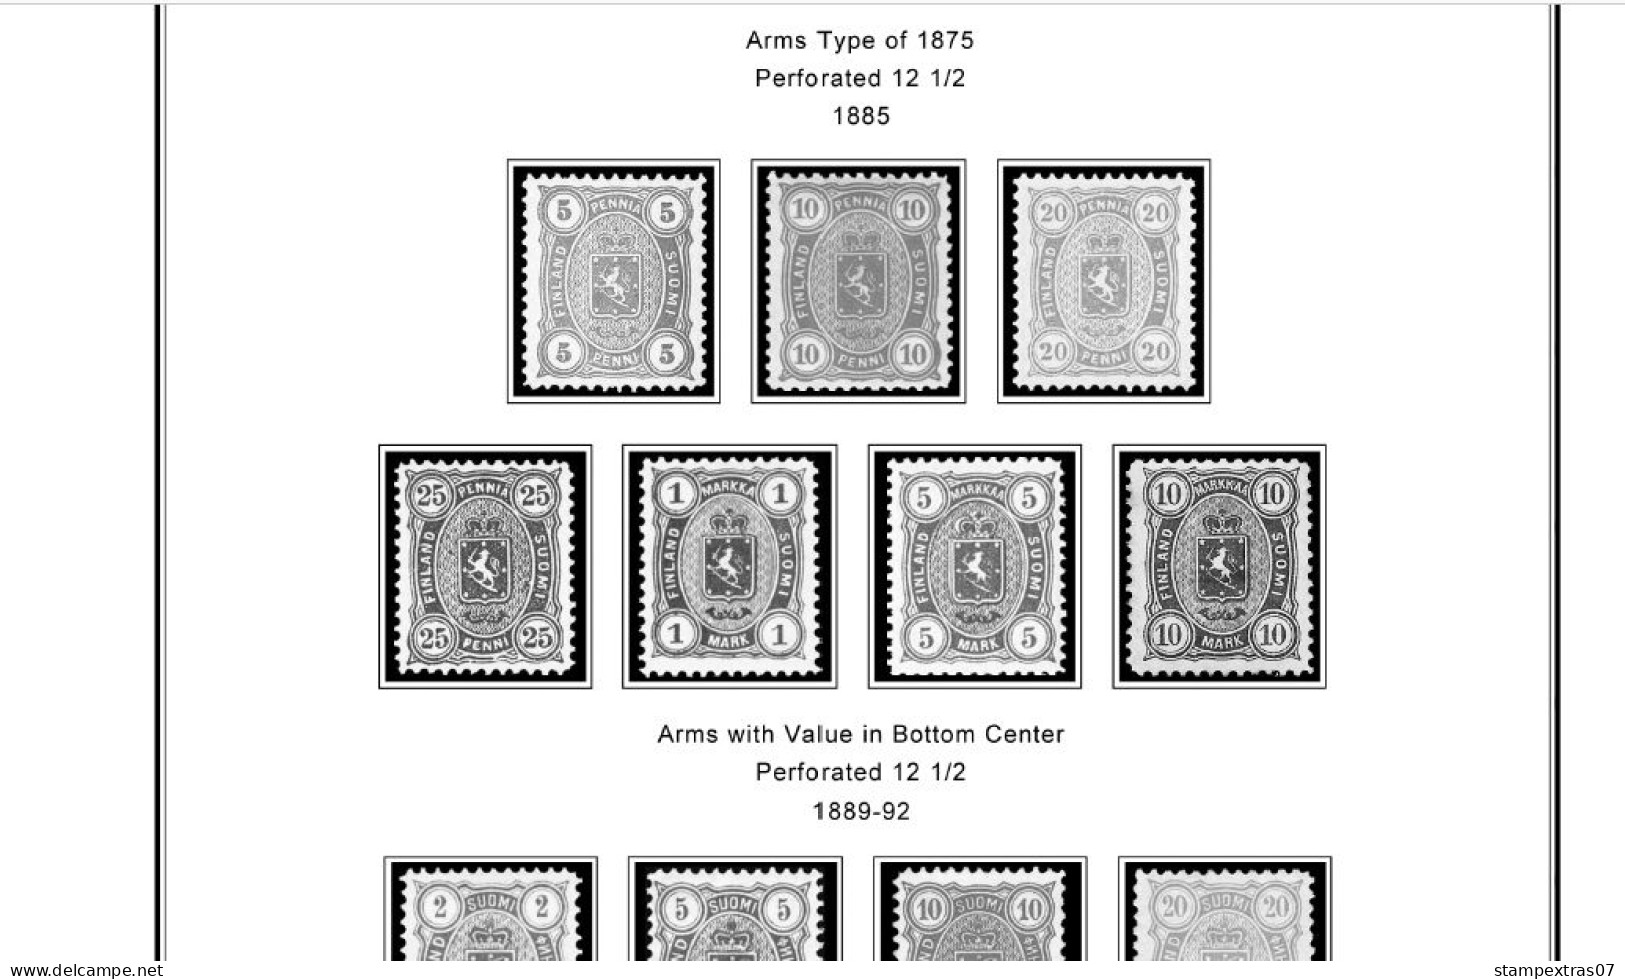 FINLAND 1856-2010 STAMP ALBUM PAGES (218 B&w Illustrated Pages) - Inglés